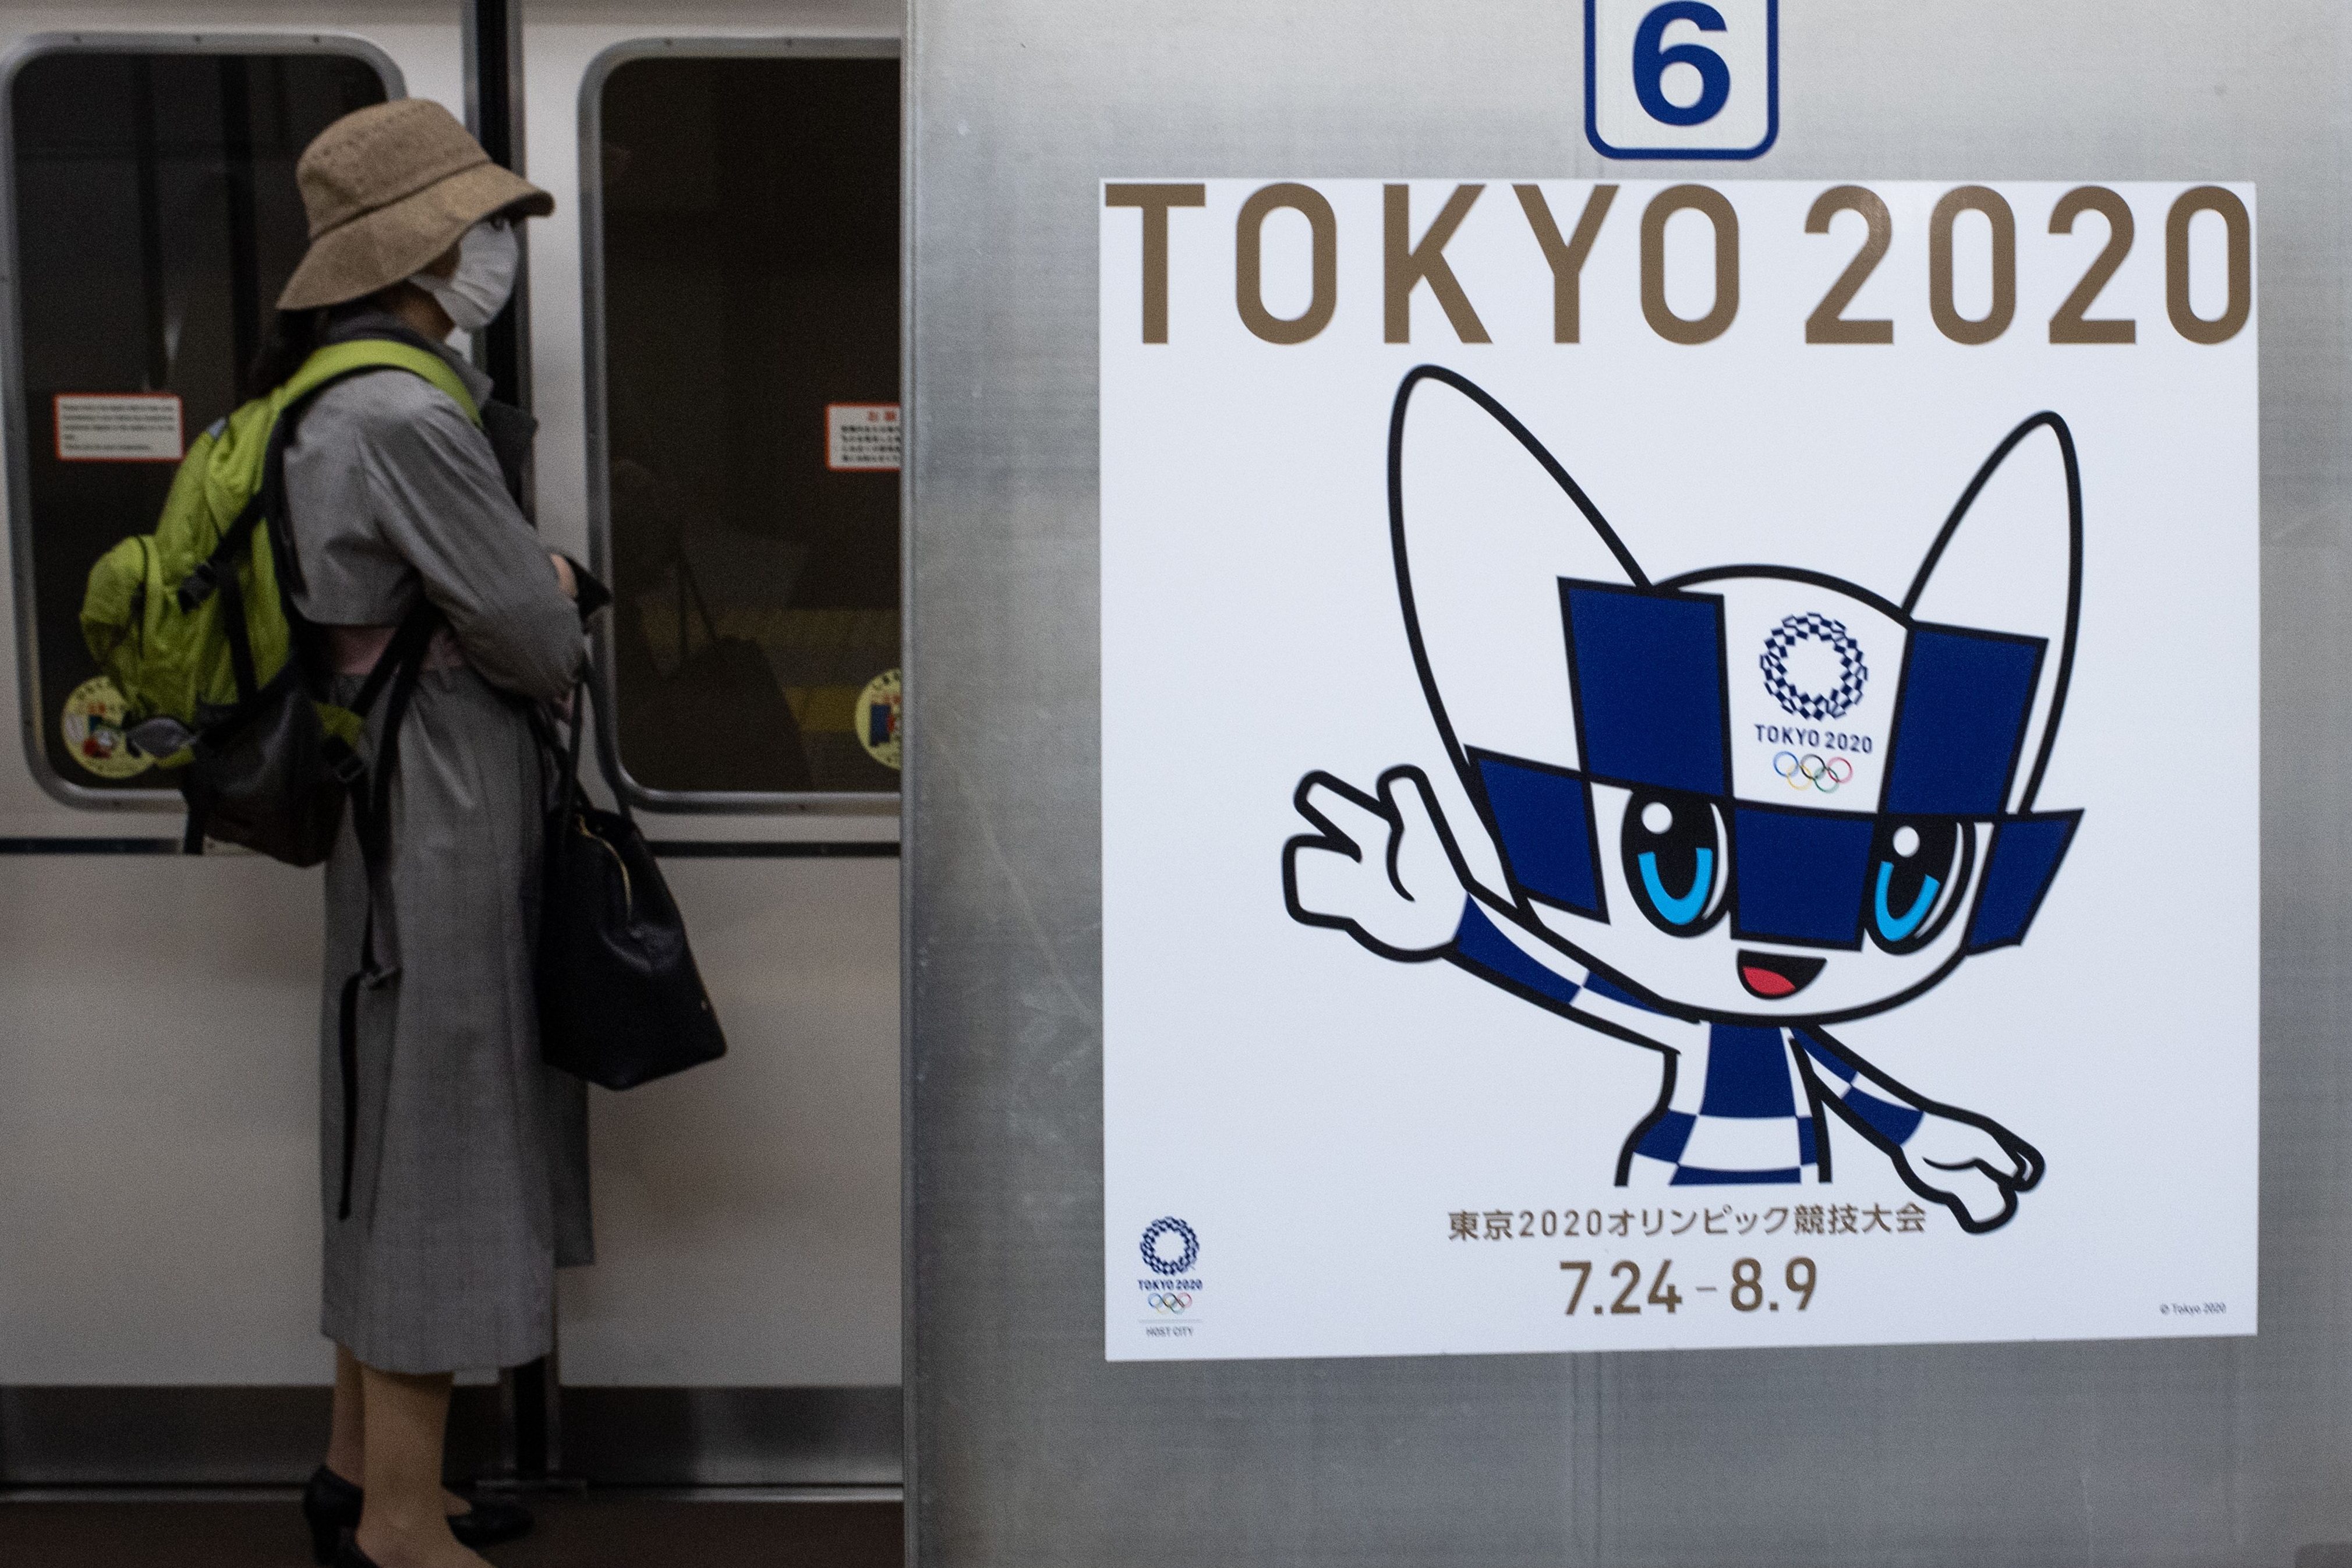 IOC VP: Tokyo Olympics Will Be “Games That Conquered COVID”